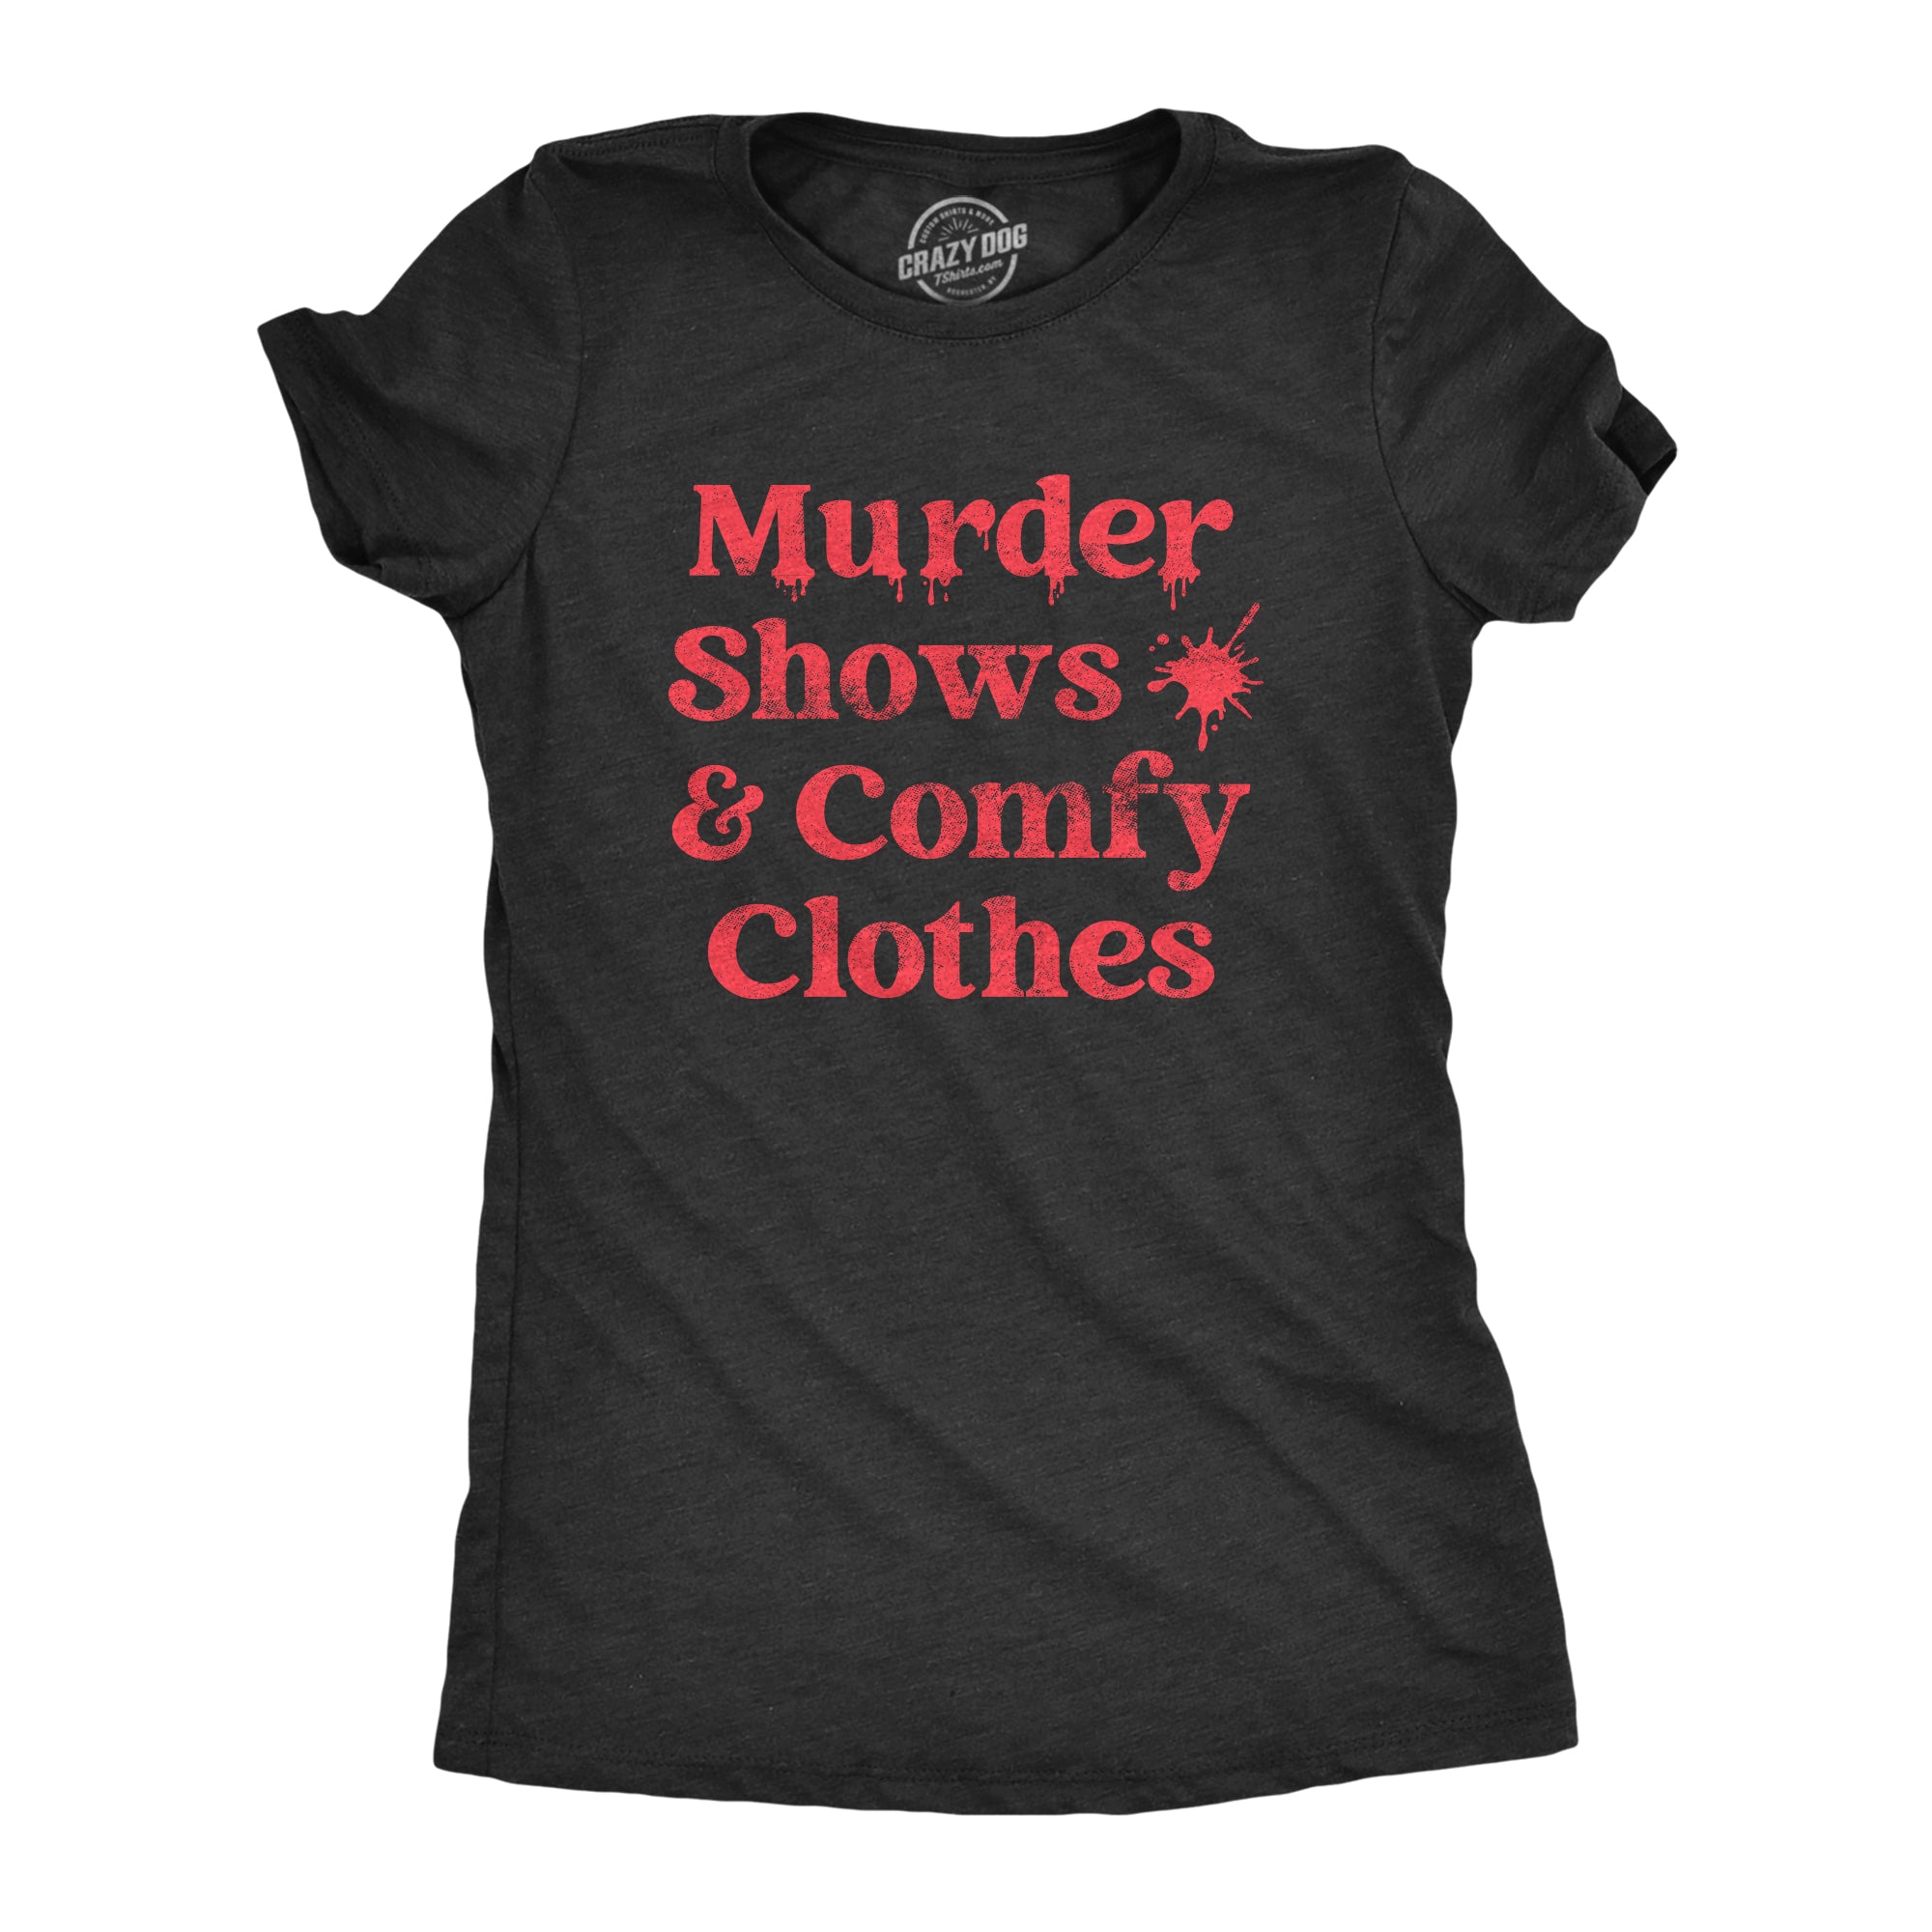 Funny Heather Black Murder Shows And Comfy Clothes Womens T Shirt Nerdy TV & Movies Tee